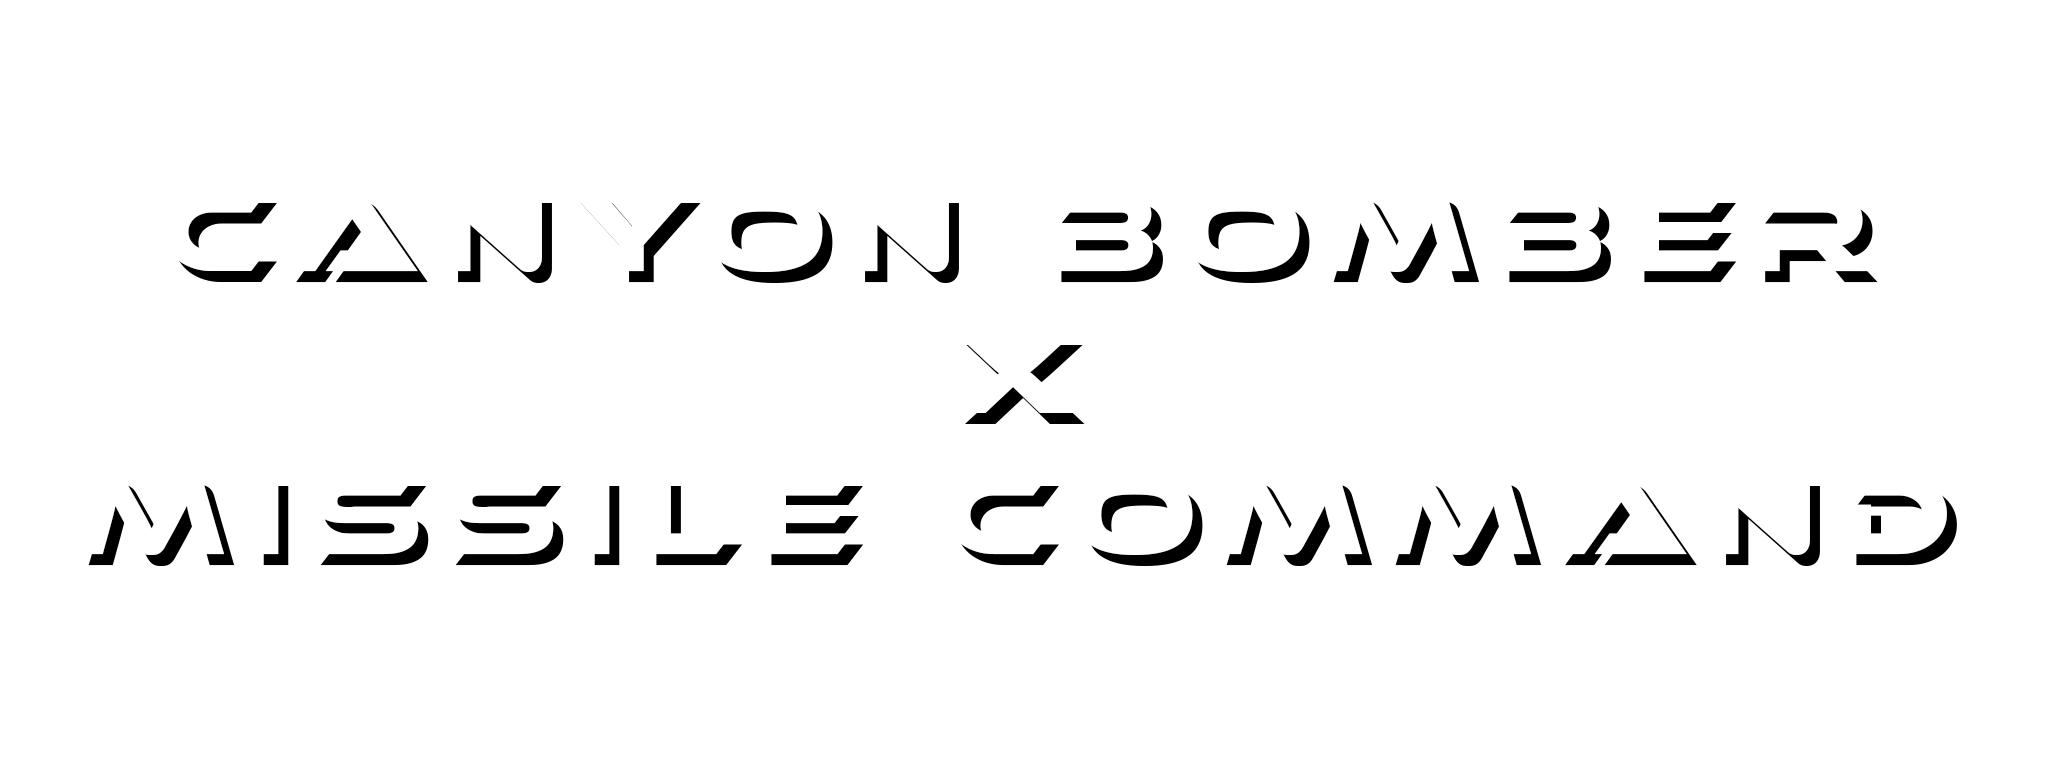 Canyon Bomber x Missile Command